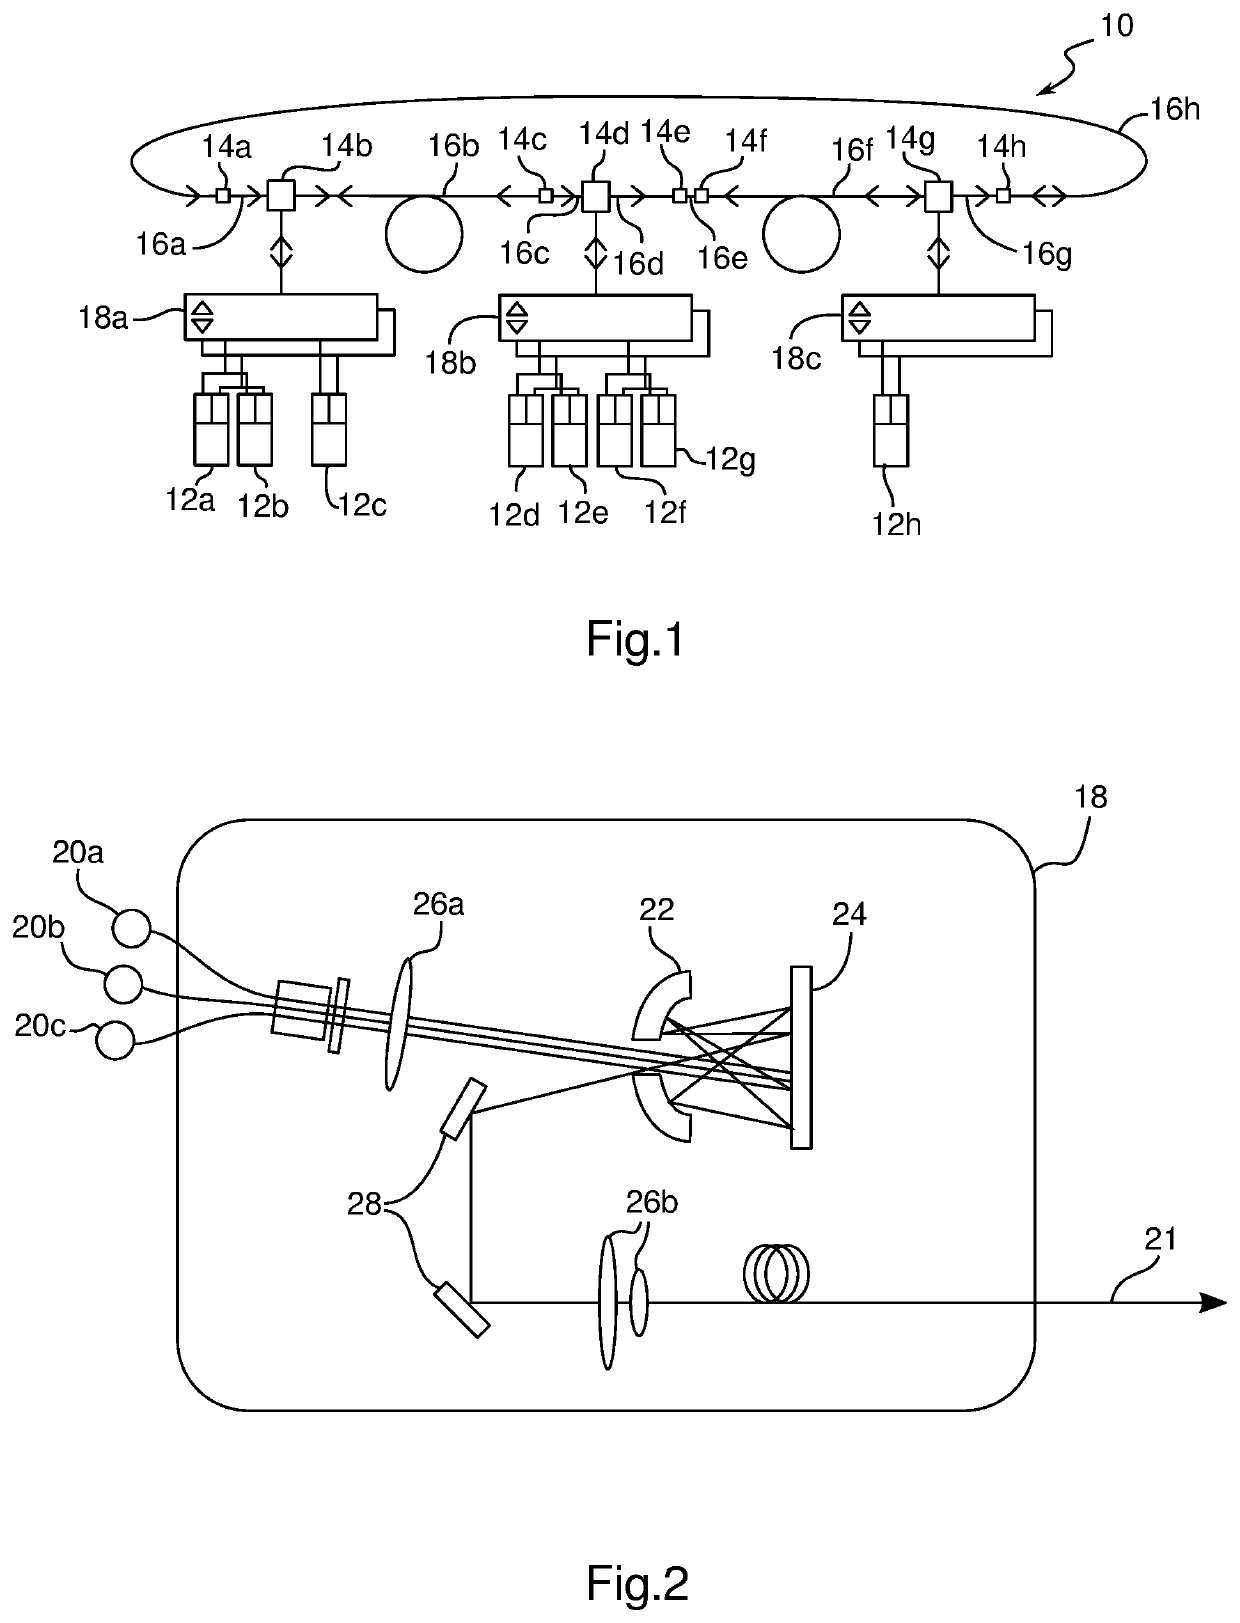 Embedded optical ring communication network for aircraft